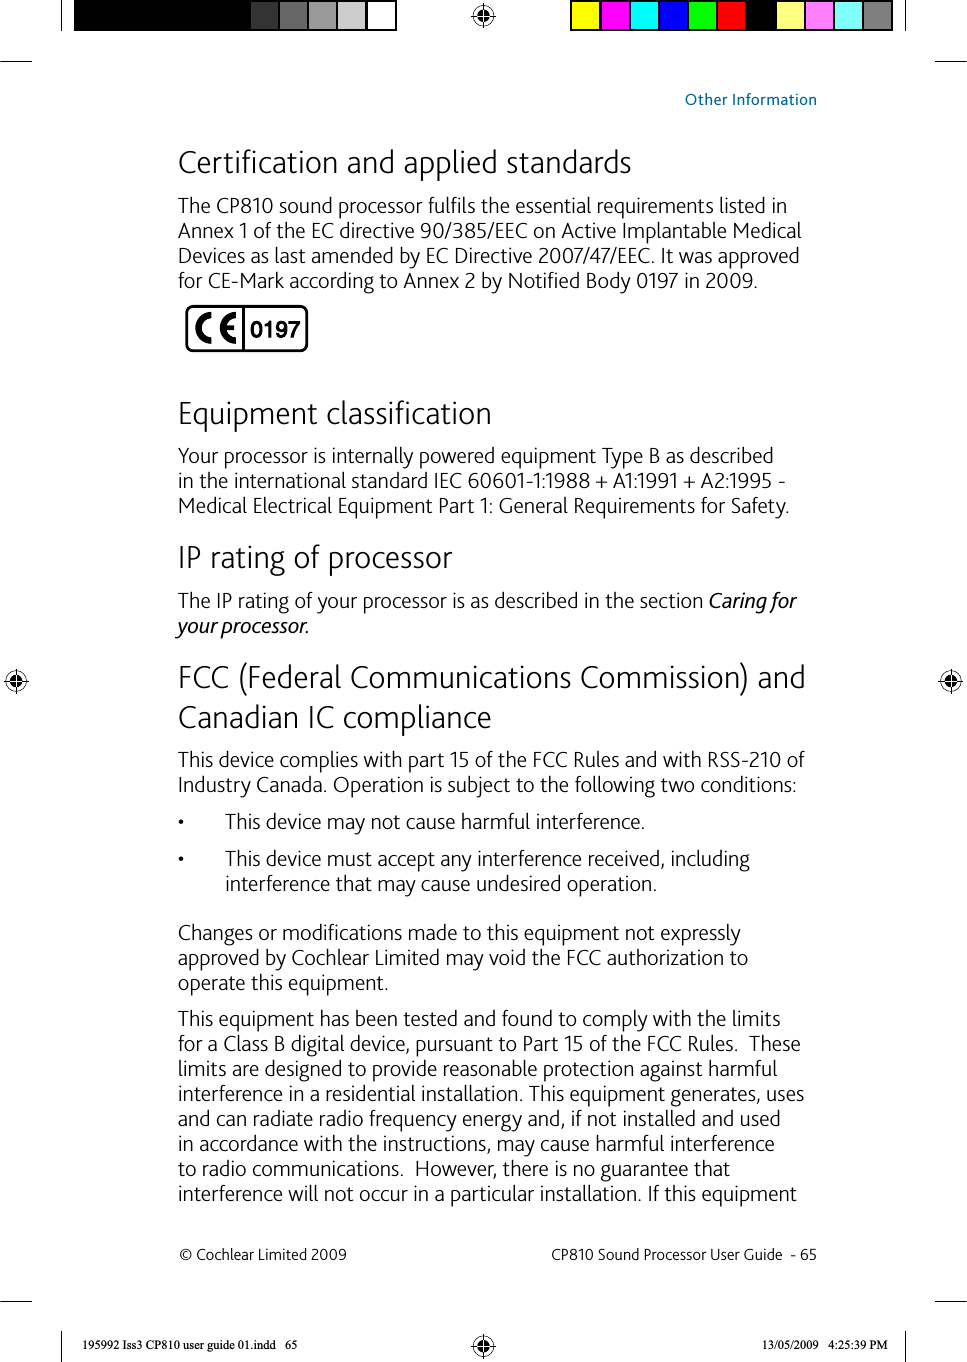  Certiﬁ cation and applied standardsThe CP810 sound processor fulﬁ ls the essential requirements listed in Annex 1 of the EC directive 90/385/EEC on Active Implantable Medical Devices as last amended by EC Directive 2007/47/EEC. It was approved for CE-Mark according to Annex 2 by Notiﬁ ed Body 0197 in 2009.Equipment classiﬁ cationYour processor is internally powered equipment Type B as described in the international standard IEC 60601-1:1988 + A1:1991 + A2:1995 - Medical Electrical Equipment Part 1: General Requirements for Safety.IP rating of processorThe IP rating of your processor is as described in the section Caring for your processor.  FCC (Federal Communications Commission) and Canadian IC complianceThis device complies with part 15 of the FCC Rules and with RSS-210 of Industry Canada. Operation is subject to the following two conditions:This device may not cause harmful interference.• This device must accept any interference received, including • interference that may cause undesired operation.Changes or modiﬁ cations made to this equipment not expressly approved by Cochlear Limited may void the FCC authorization to operate this equipment.This equipment has been tested and found to comply with the limits for a Class B digital device, pursuant to Part 15 of the FCC Rules.  These limits are designed to provide reasonable protection against harmful interference in a residential installation. This equipment generates, uses and can radiate radio frequency energy and, if not installed and used in accordance with the instructions, may cause harmful interference to radio communications.  However, there is no guarantee that interference will not occur in a particular installation. If this equipment © Cochlear Limited 2009  CP810 Sound Processor User Guide  - 65Other Information195992 Iss3 CP810 user guide 01.indd   65 13/05/2009   4:25:39 PM